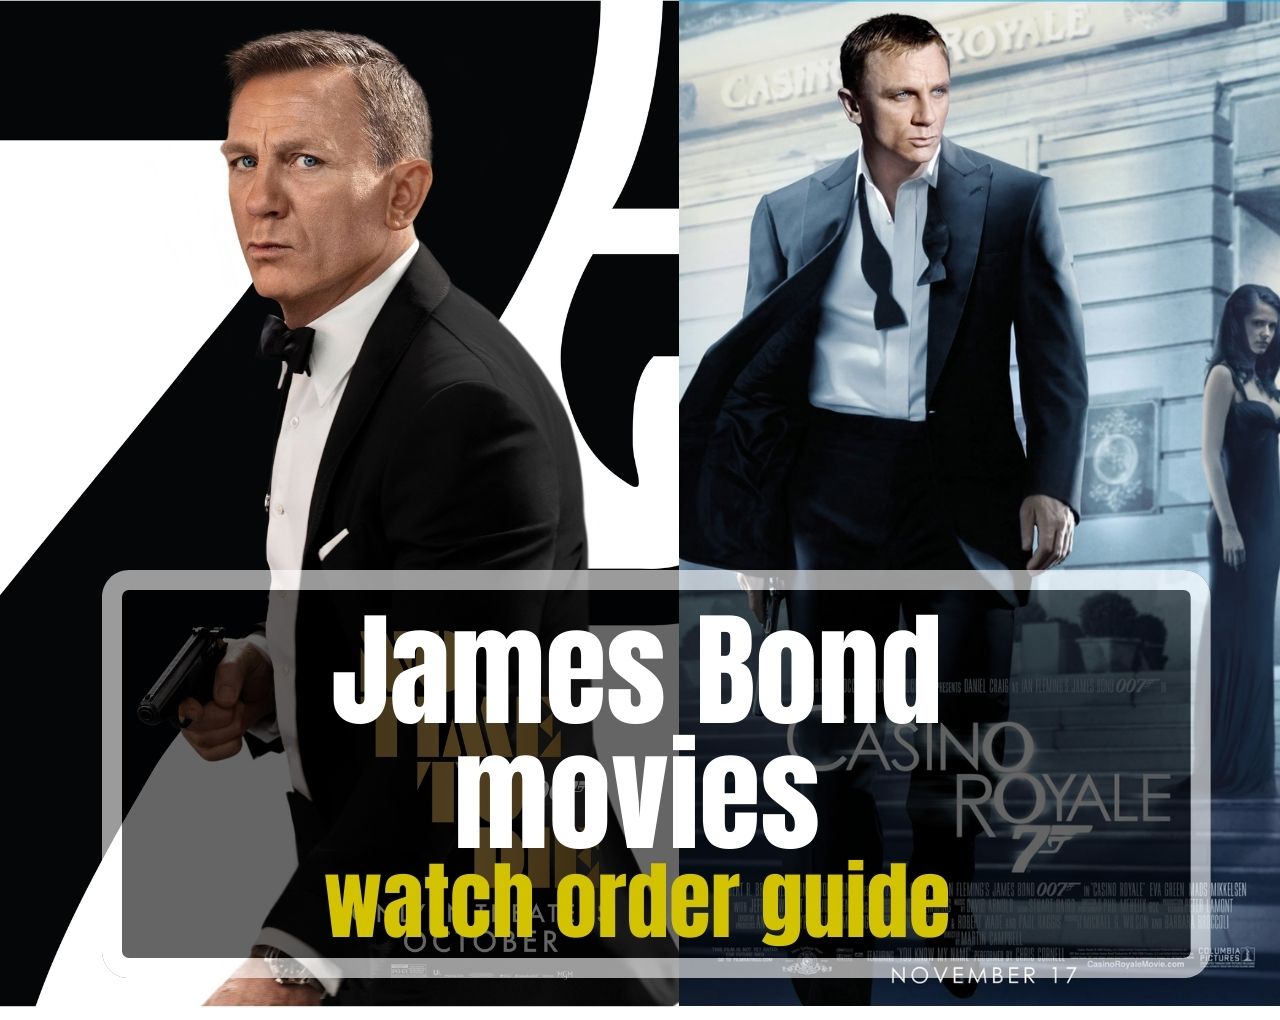 James Bond movies watch order guide